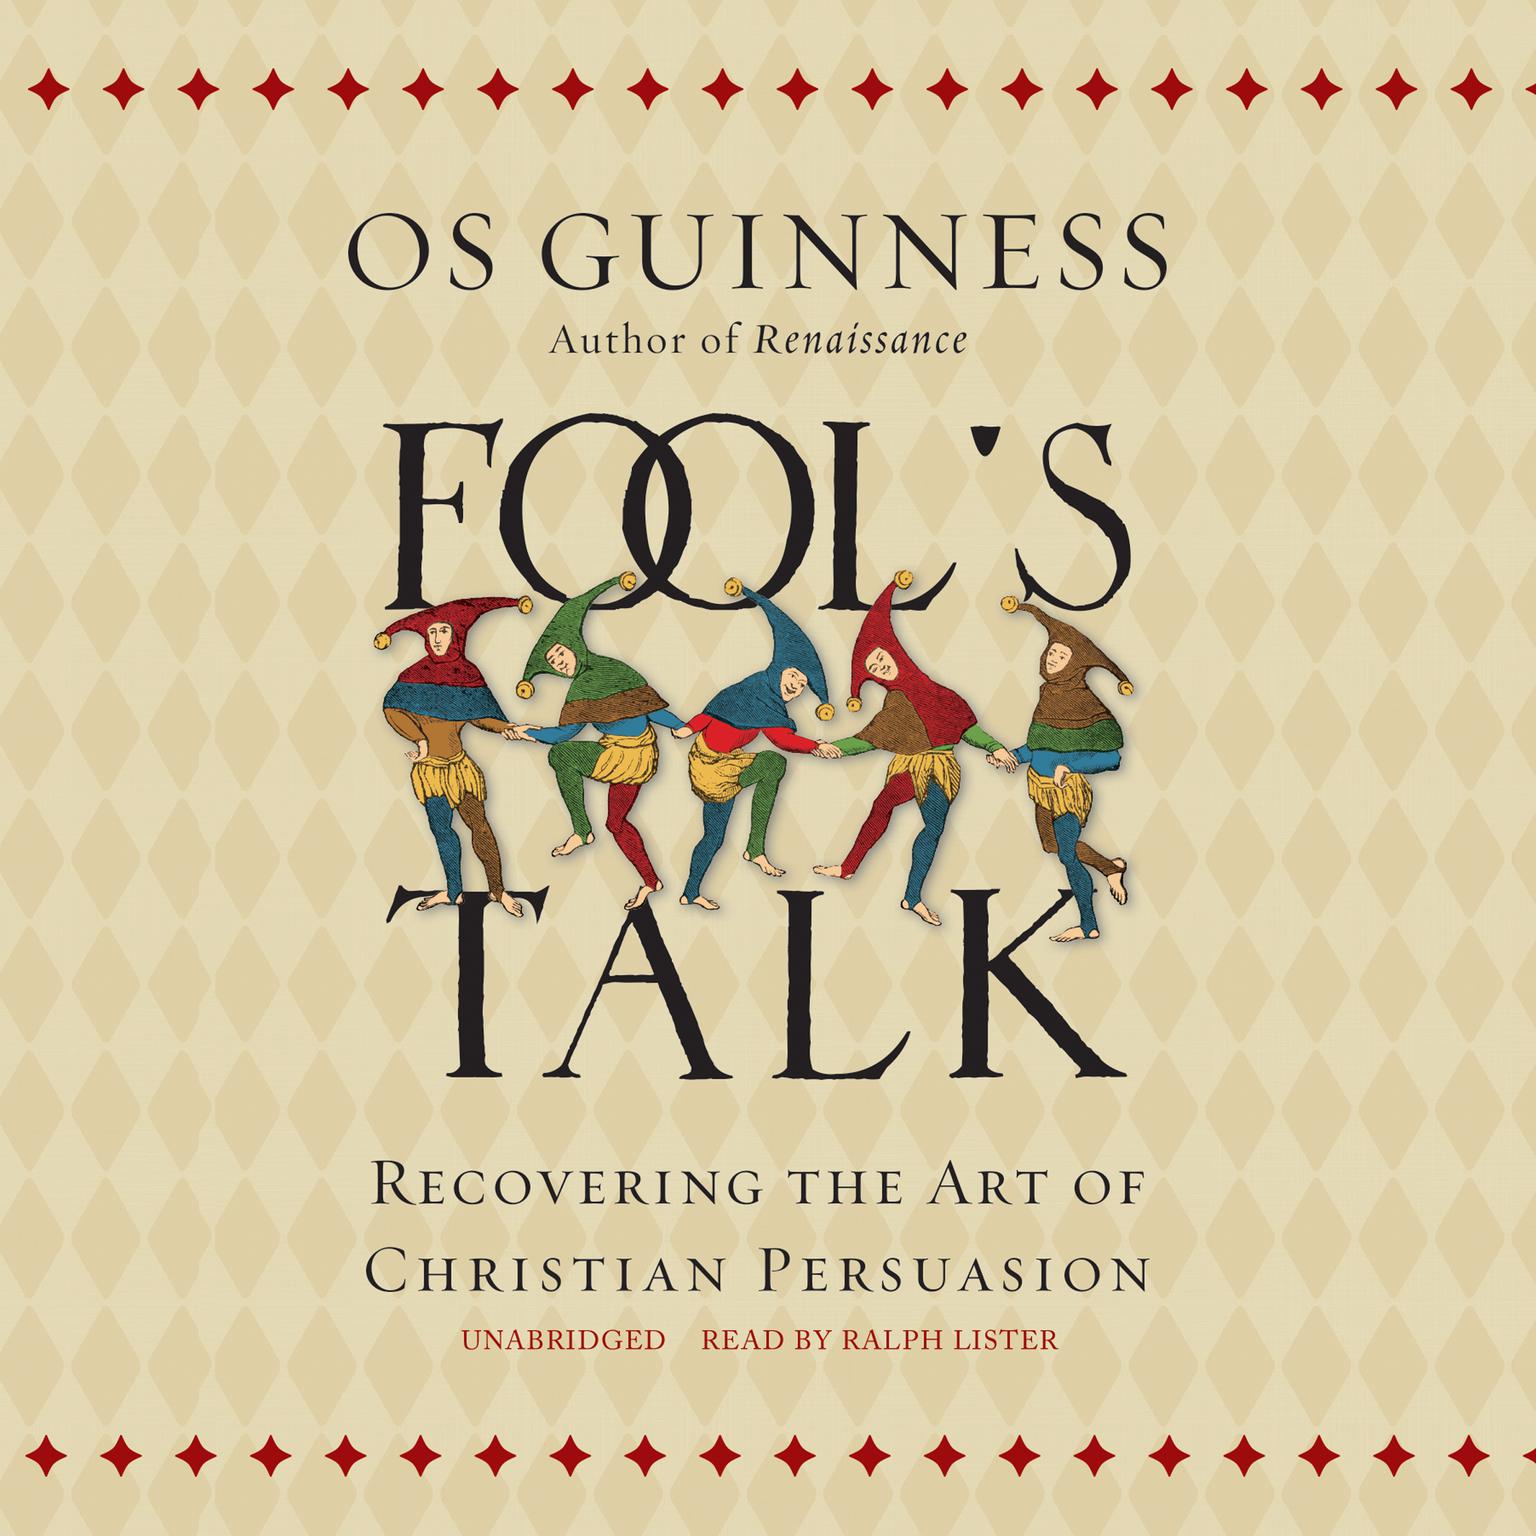 Fool’s Talk: Recovering the Art of Christian Persuasion Audiobook, by Os Guinness